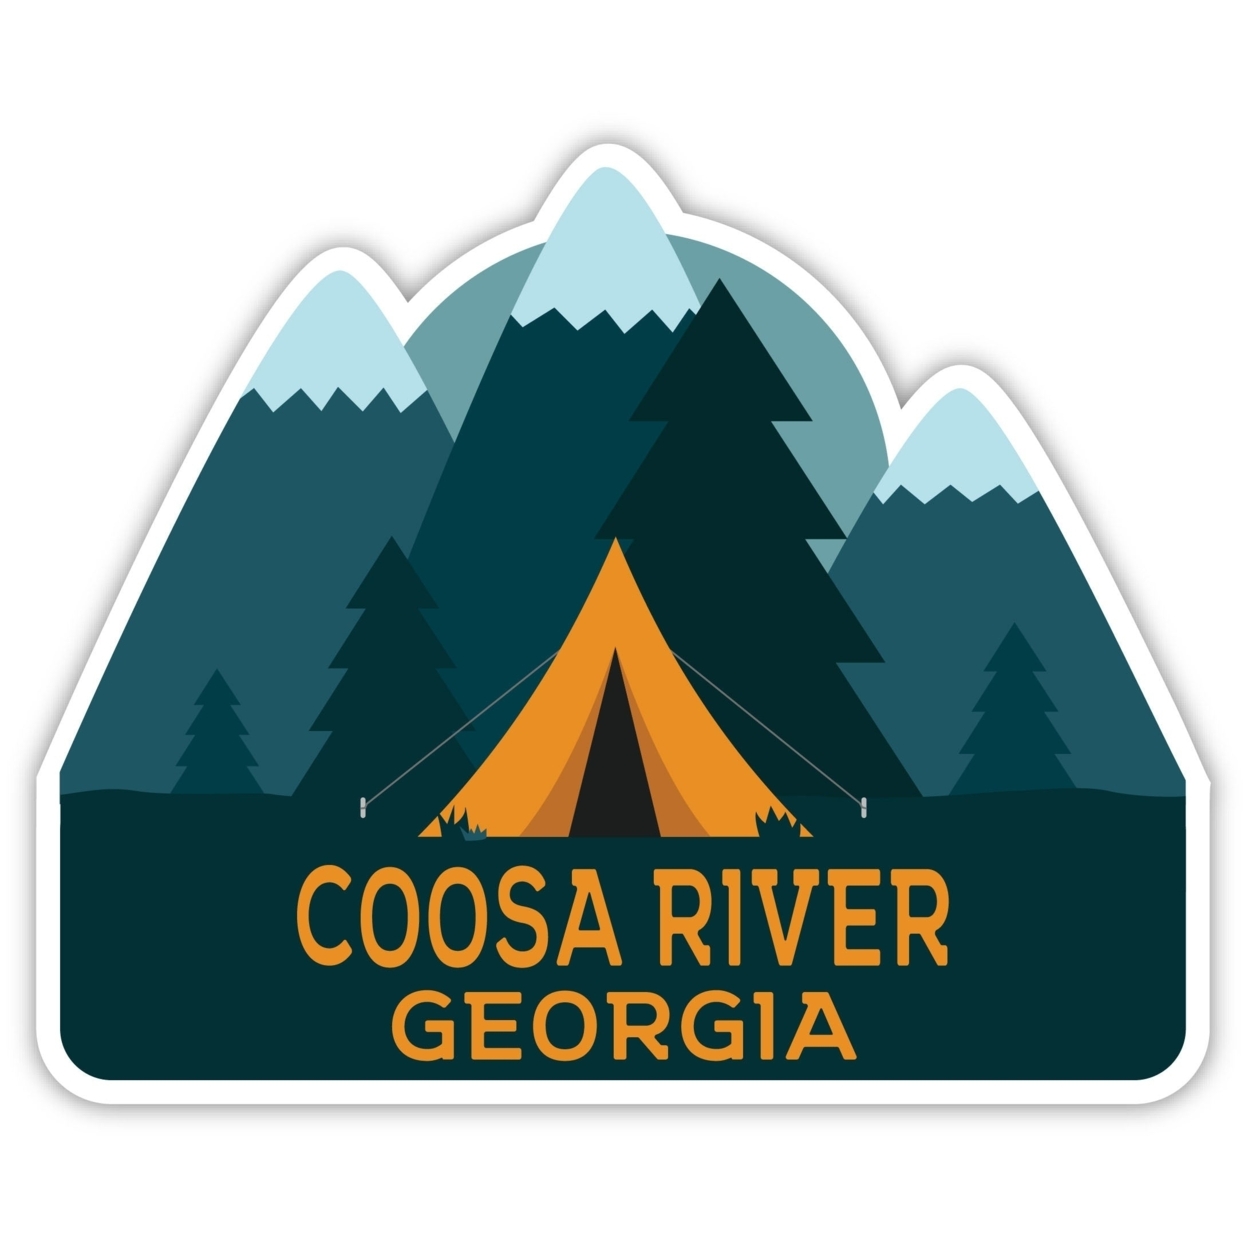 Coosa River Georgia Souvenir Decorative Stickers (Choose Theme And Size) - 4-Pack, 6-Inch, Tent